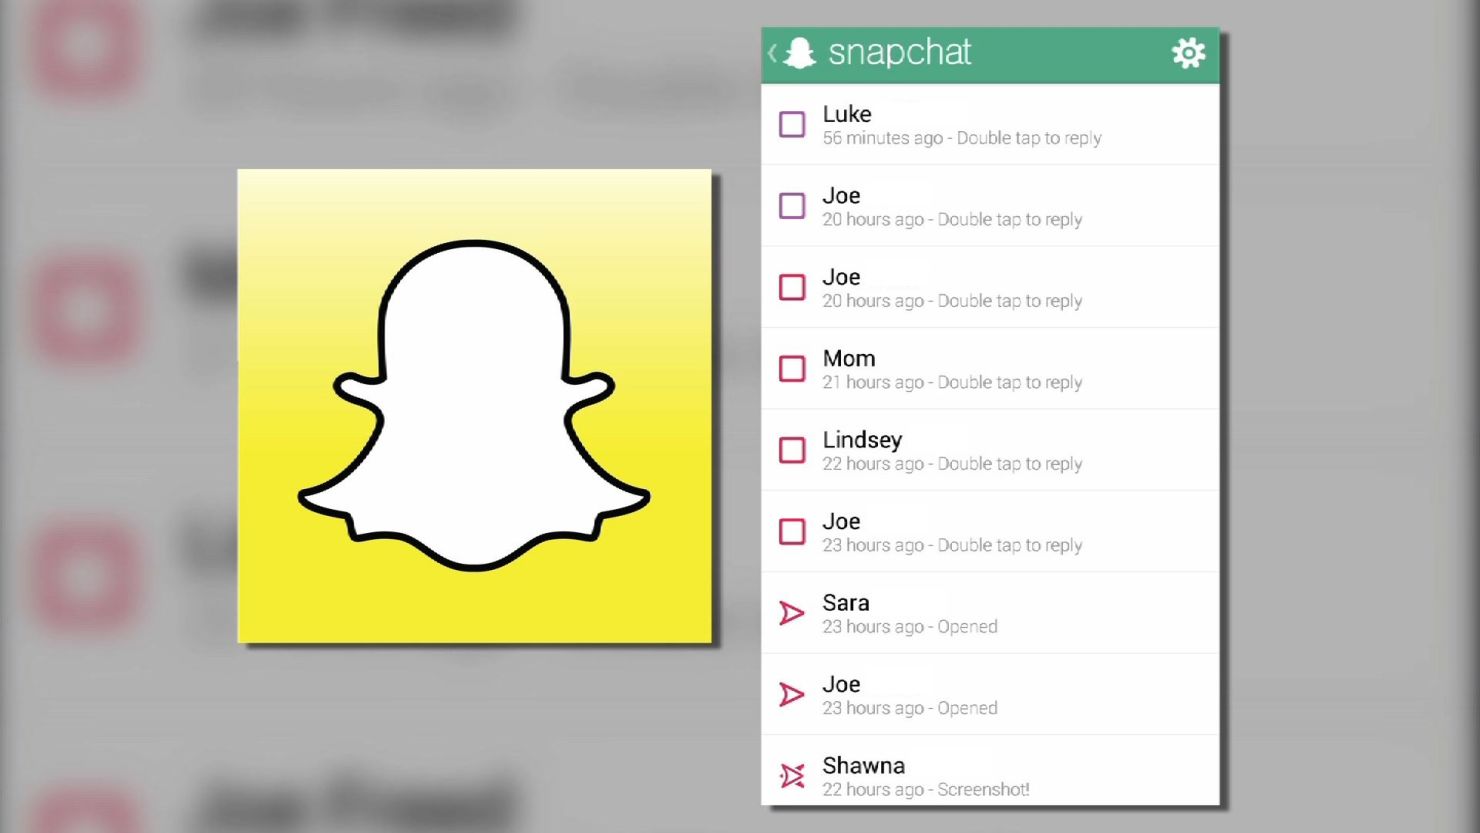 Snapchat says it has added security features, including letting users opt out of a "Find Friends" feature.